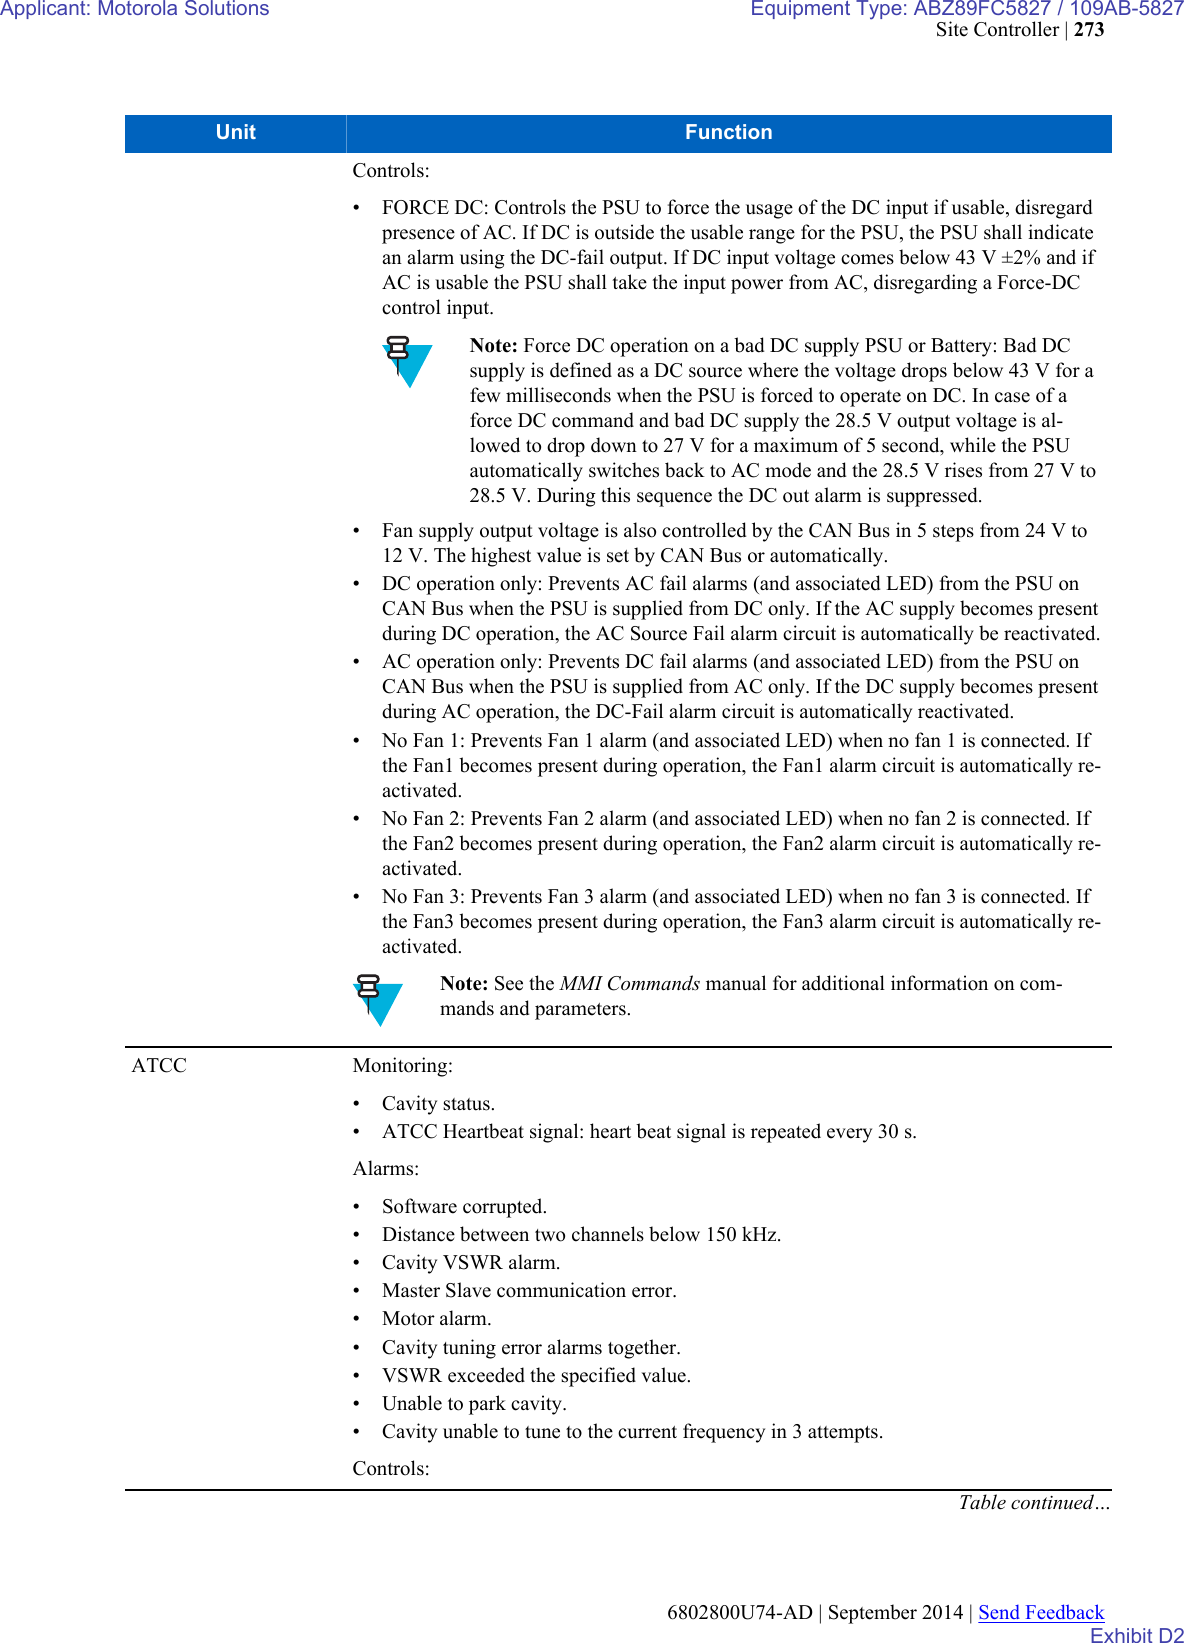 Page 101 of Motorola Solutions 89FC5827 Non Broadcast Transmitter User Manual Summit BR 800 Tx FCC Filing 3